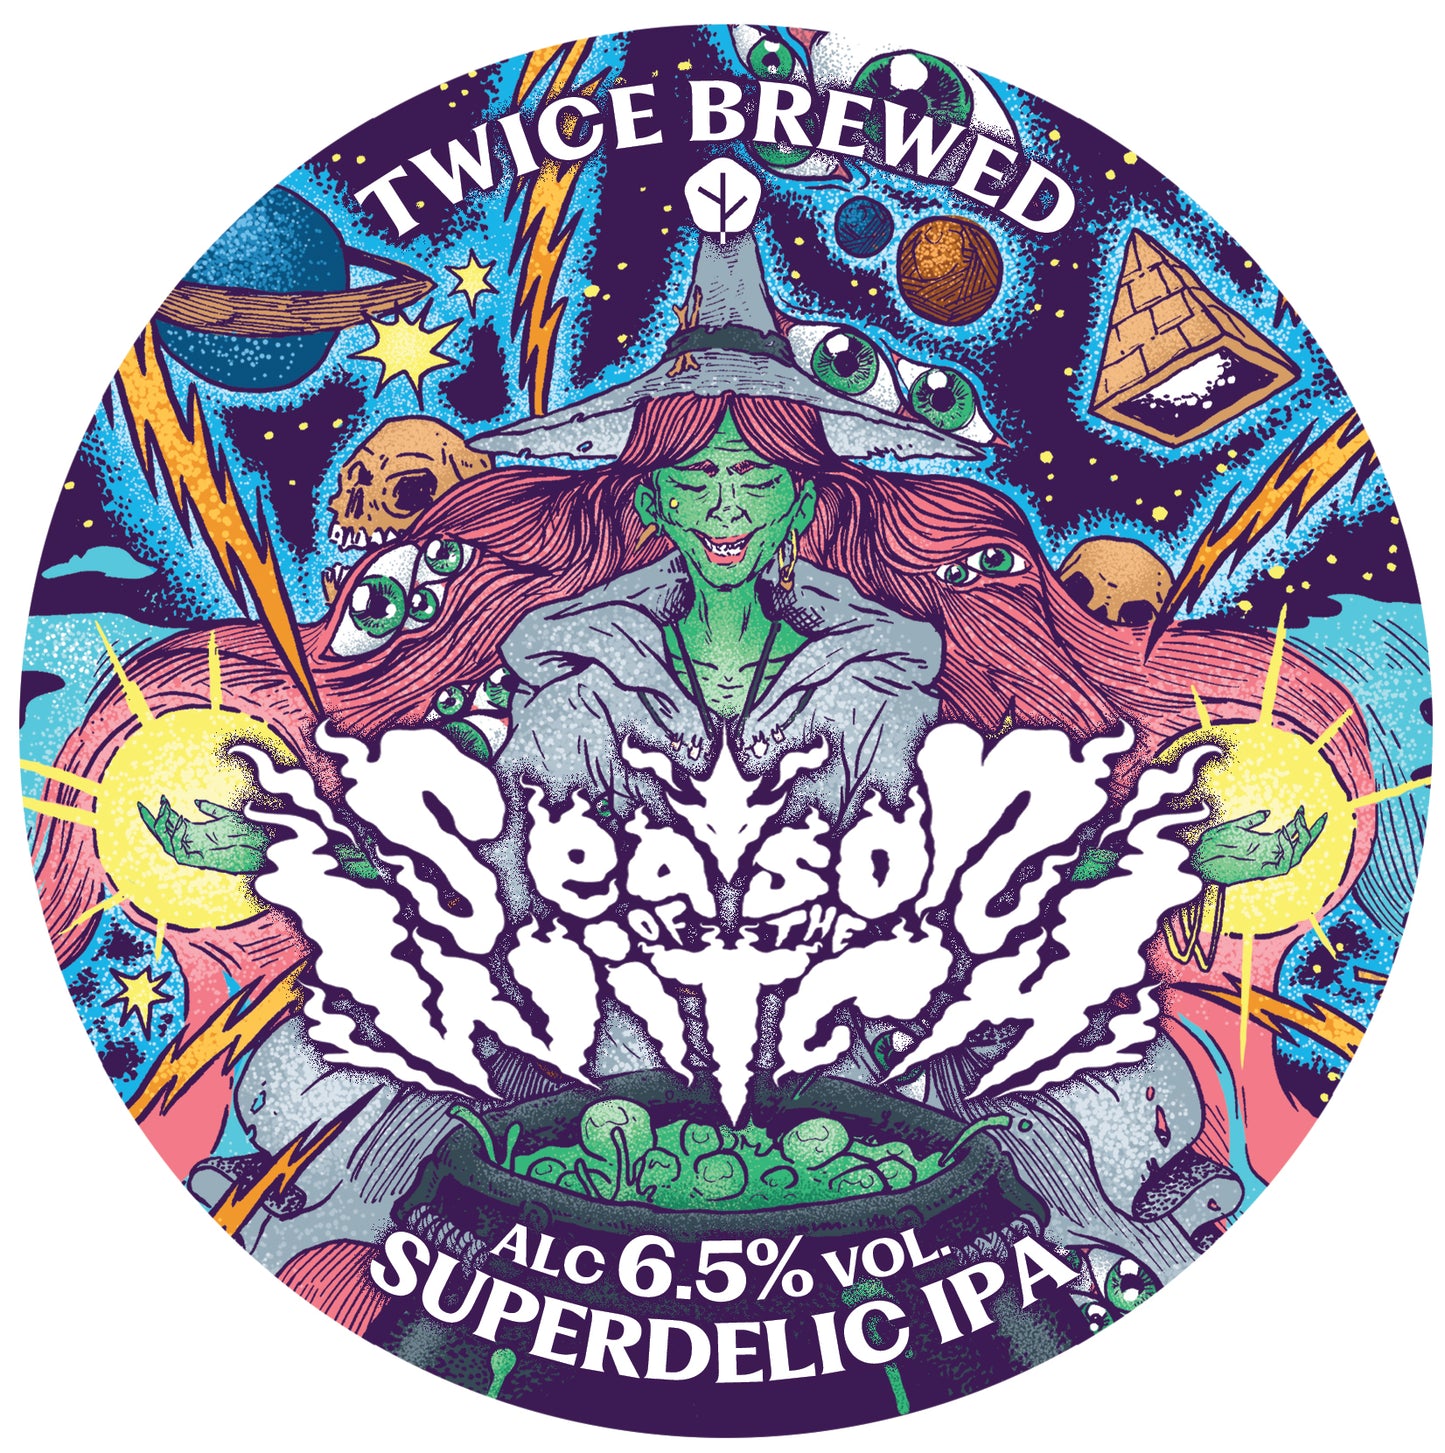 Season of the Witch, Superdelic IPA, 6.5% - 440ml can